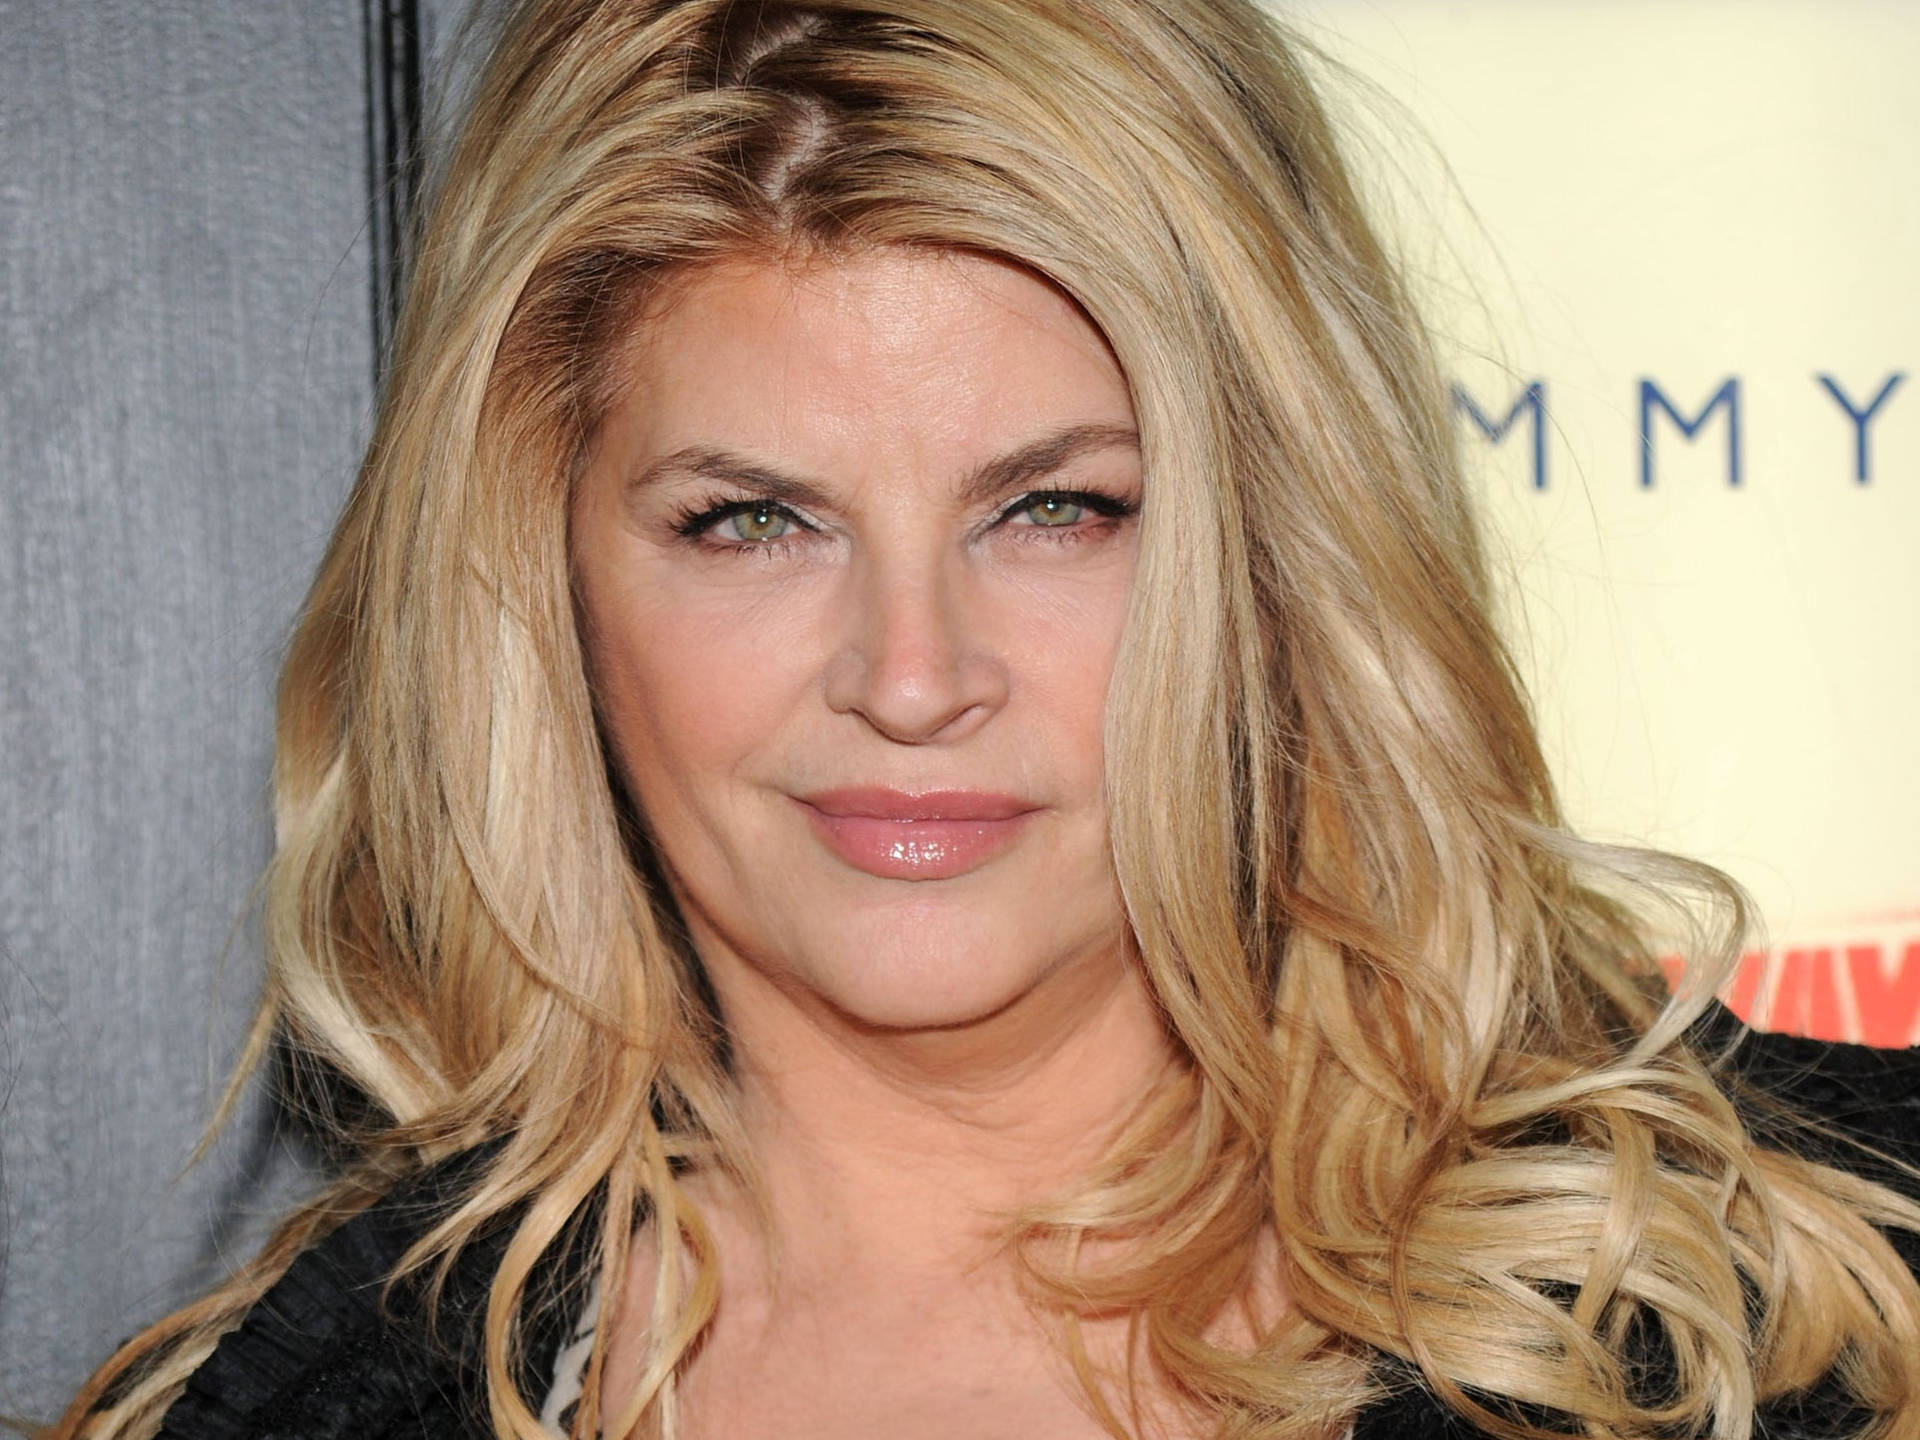 Kirstiealley The Runaways Premiere: Kirstie Alley The Runaways Premiär. (note: This Sentence Doesn't Make Sense As A Computer Or Mobile Wallpaper. A Better Translation Would Be: Kirstie Alley På Premiären Av The Runaways.) Wallpaper